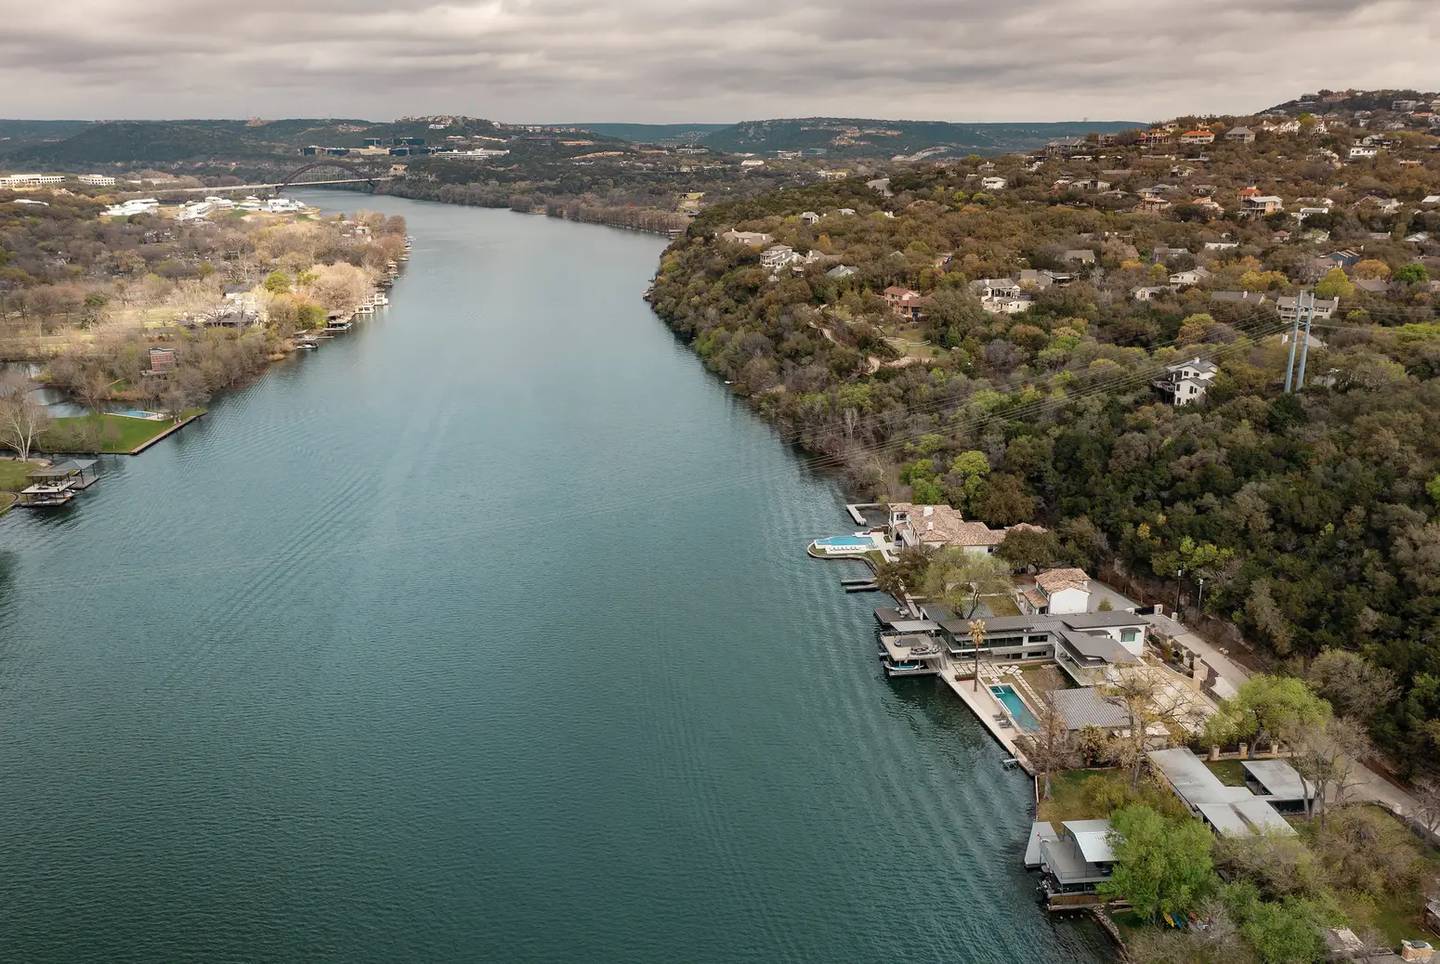 Brian Reese’s waterfront home on the Colorado River in West Austin.